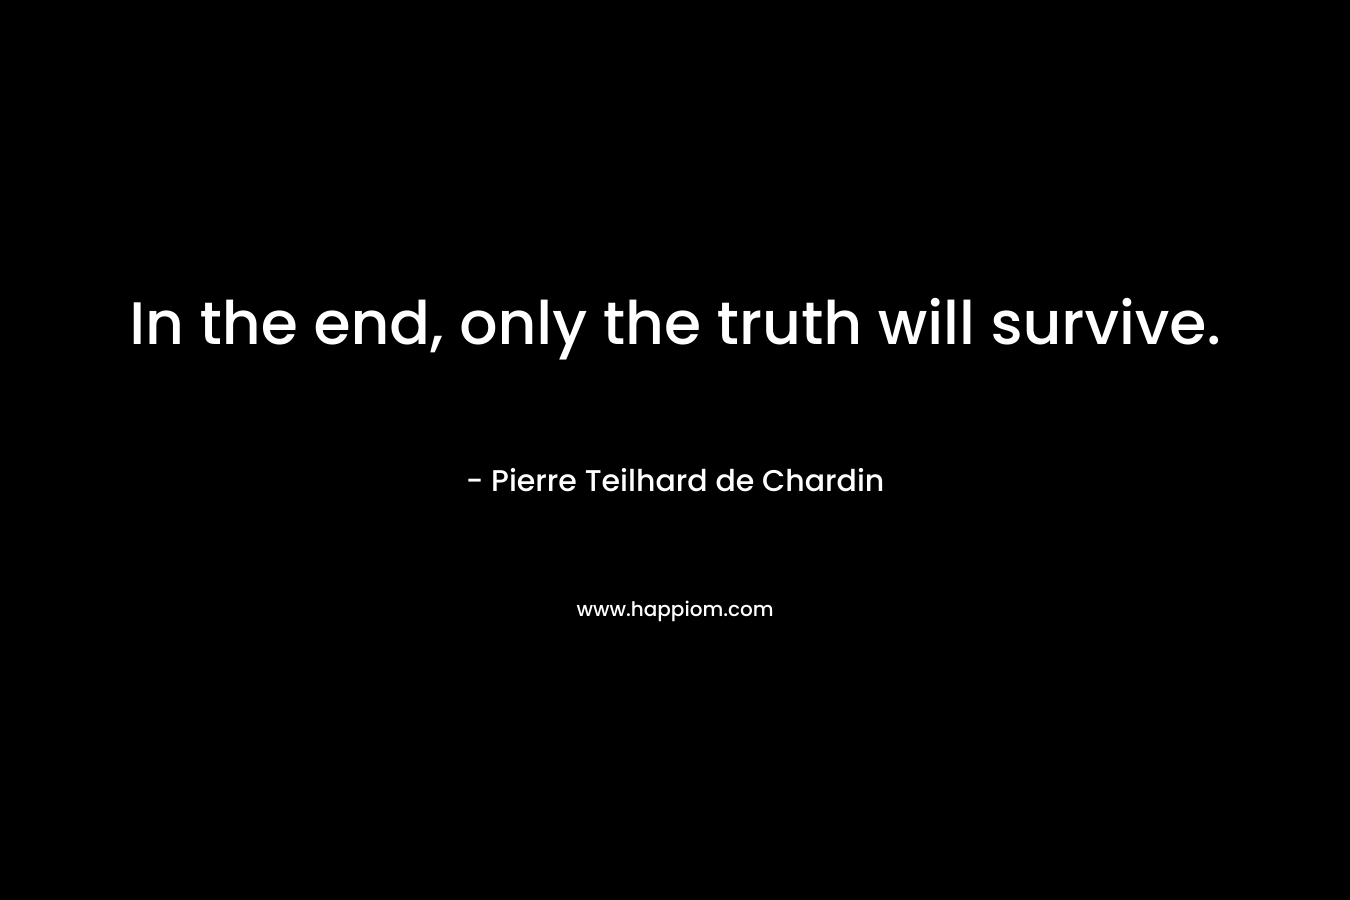 In the end, only the truth will survive. – Pierre Teilhard de Chardin